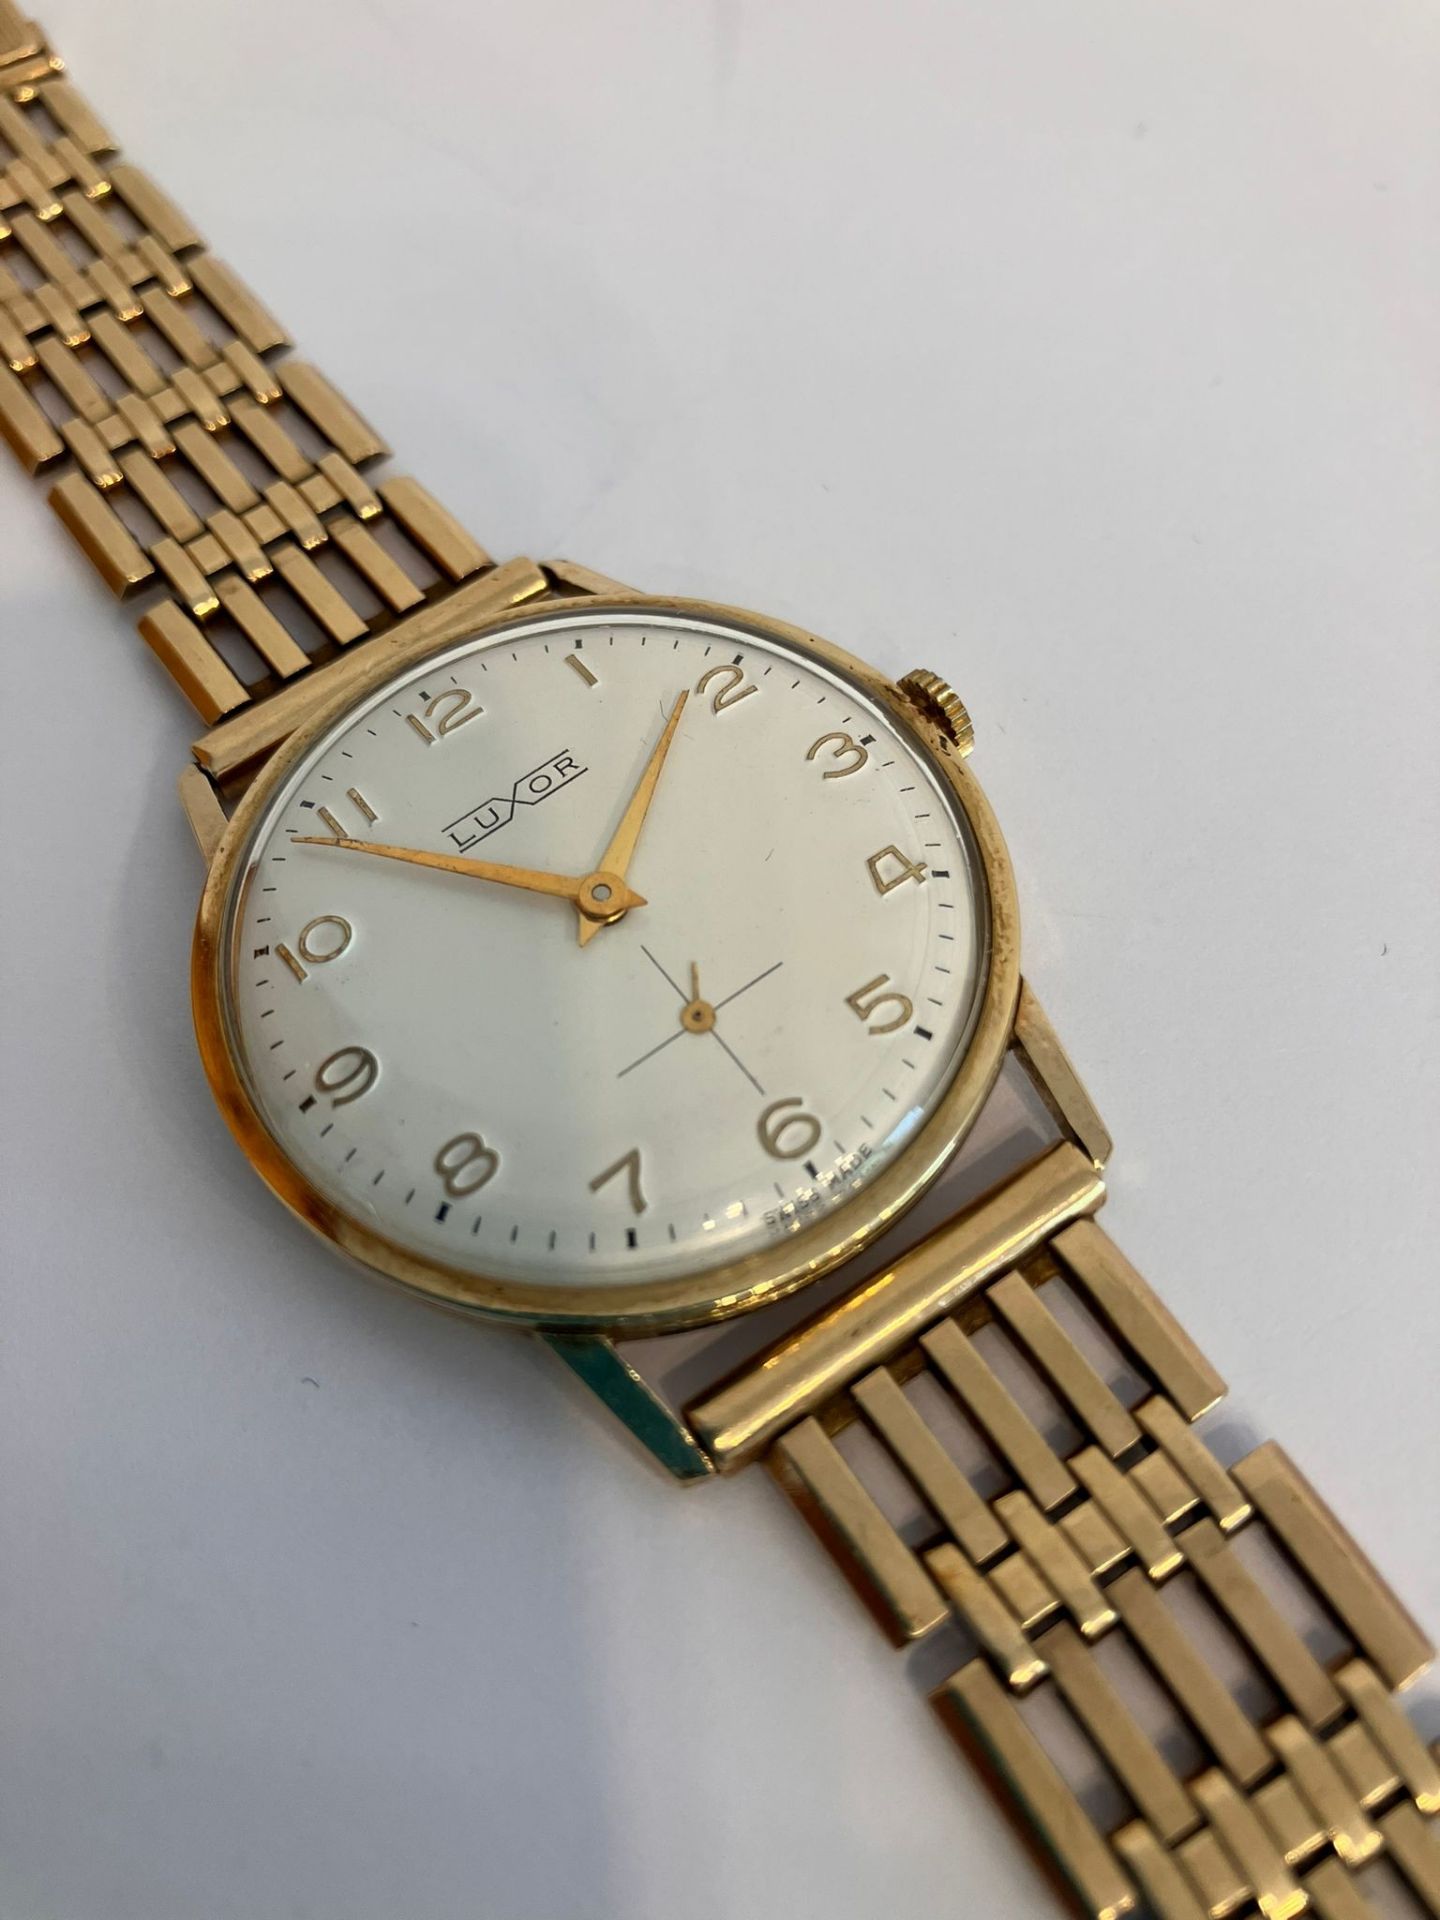 Gentleman’s vintage 14 carat GOLD LUXOR WRISTWATCH. Having white face with gold hands and digits. - Image 2 of 8